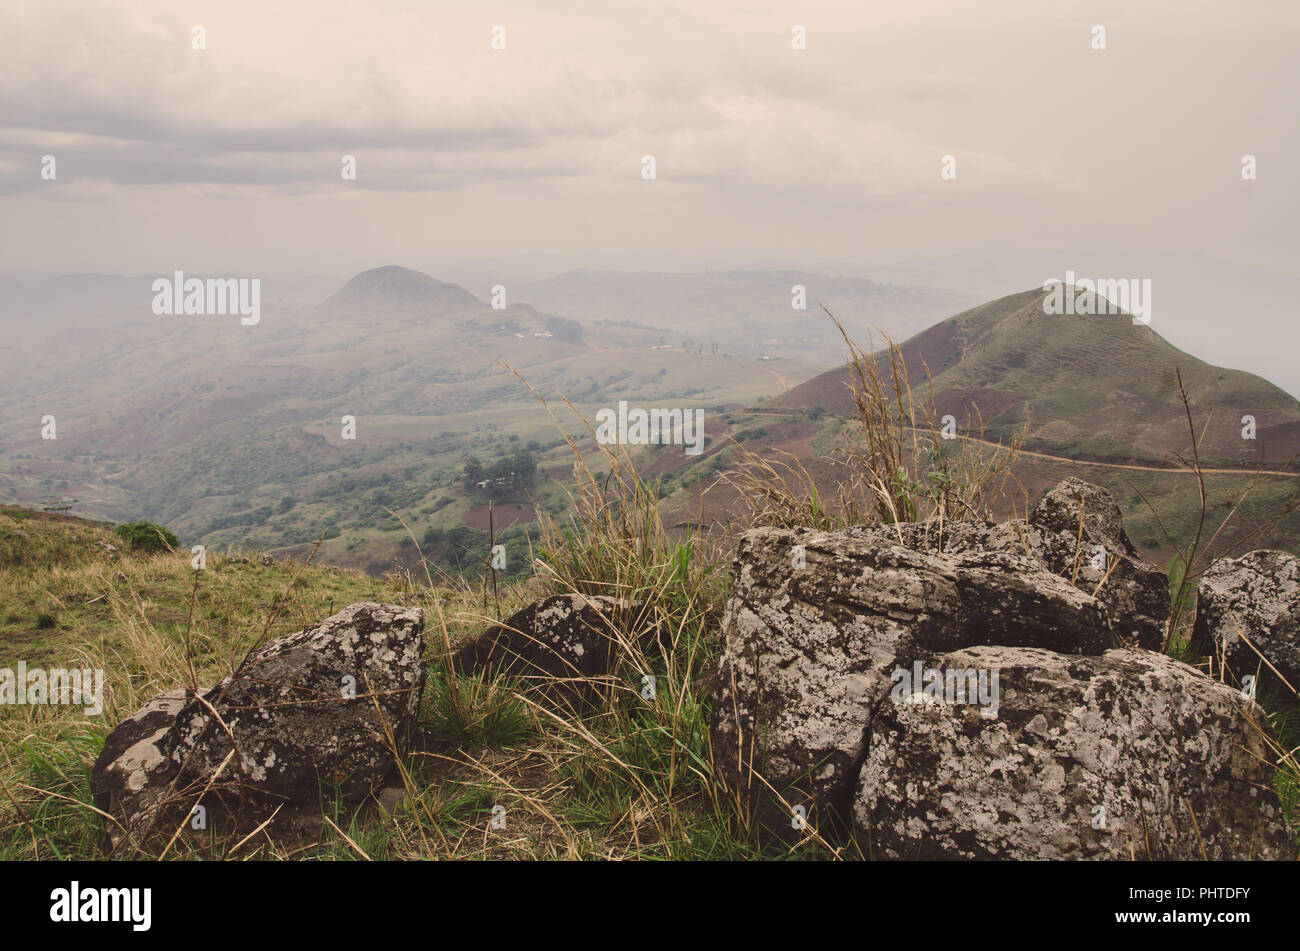 The Ring Road in Cameroon, Africa with soft hills in background and large rocks in foreground on overcast day. Stock Photo